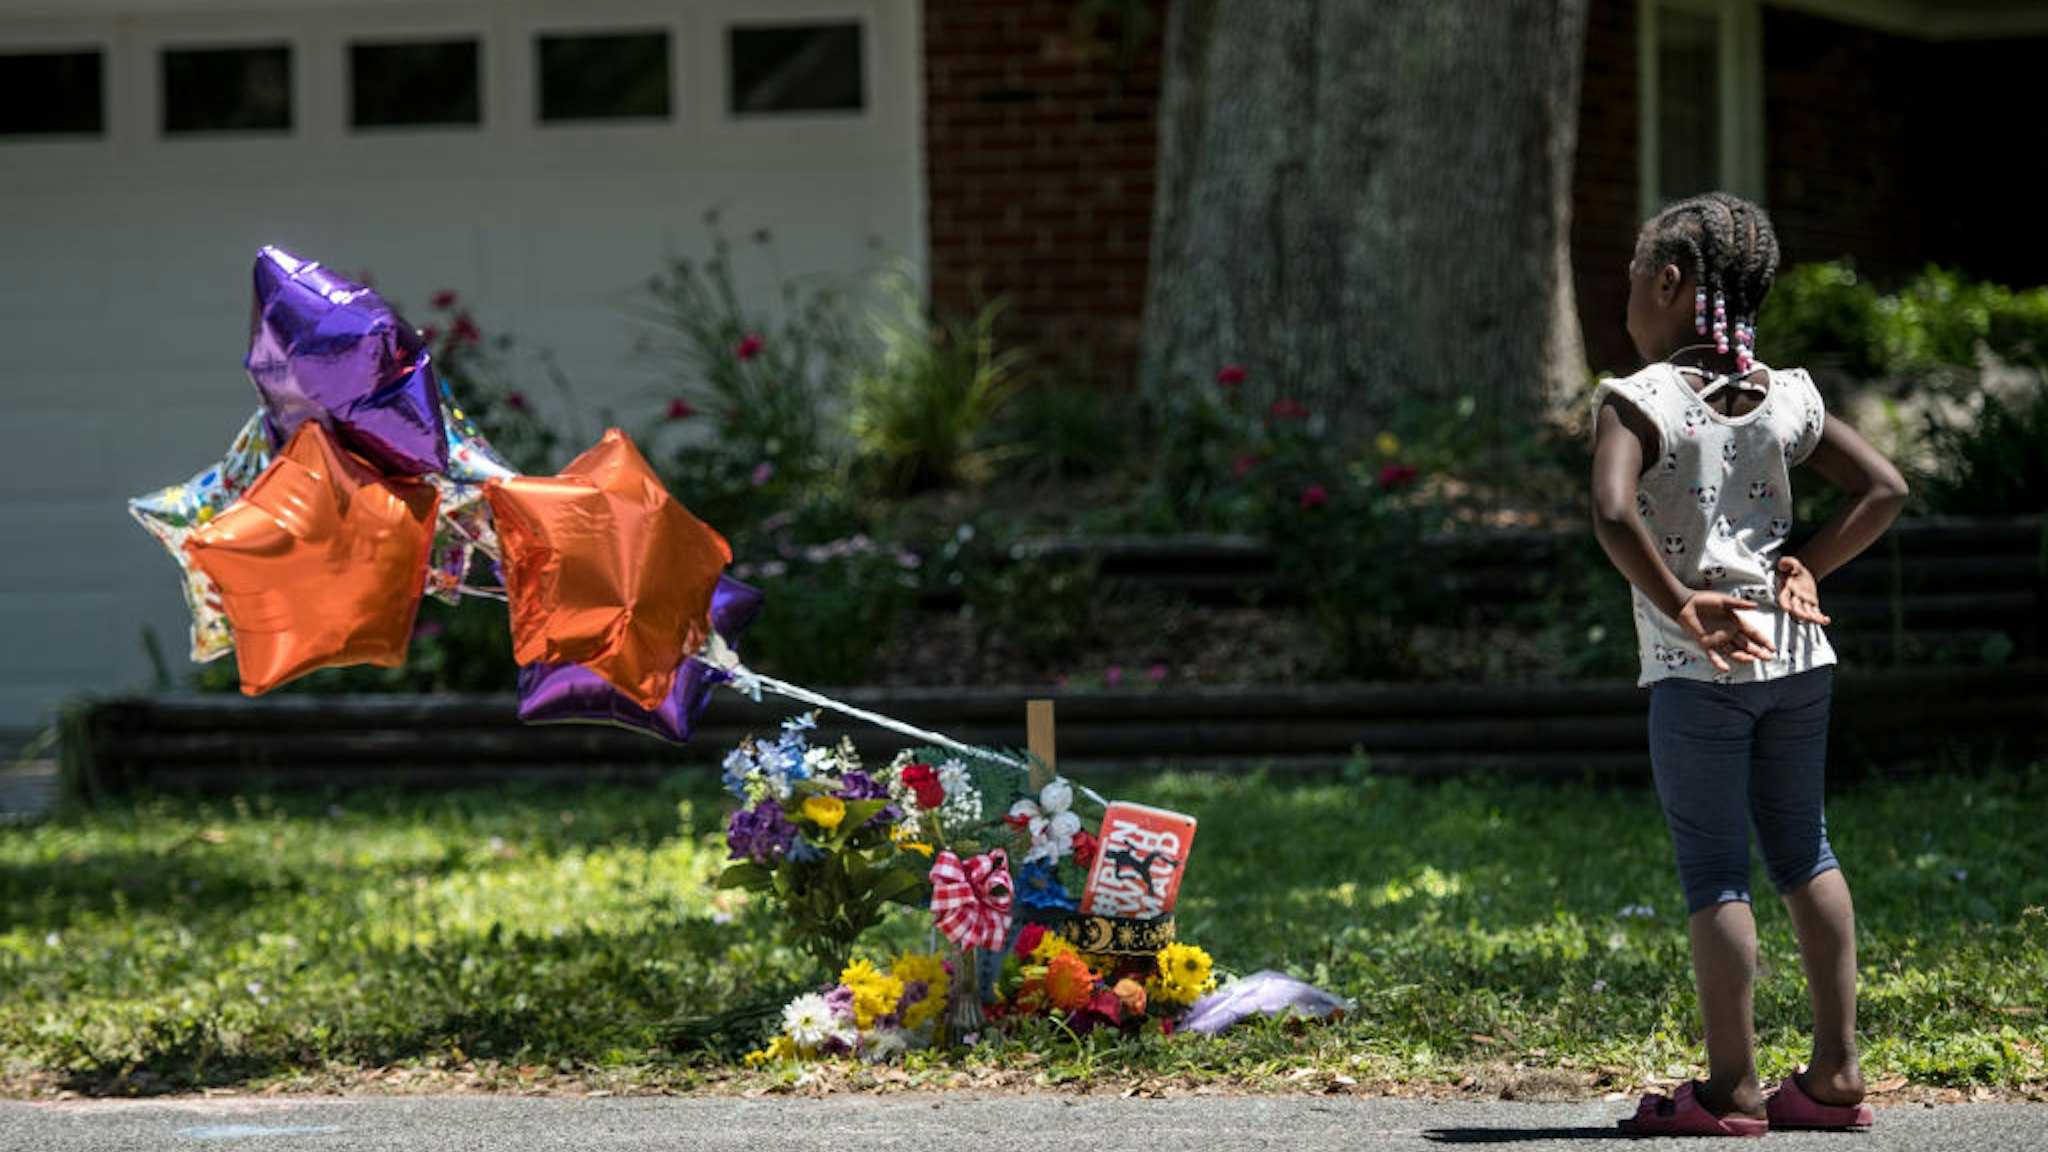 A young girl looks at a memorial for Ahmaud Arbery near where he was shot and killed May 8, 2020 in Brunswick, Georgia